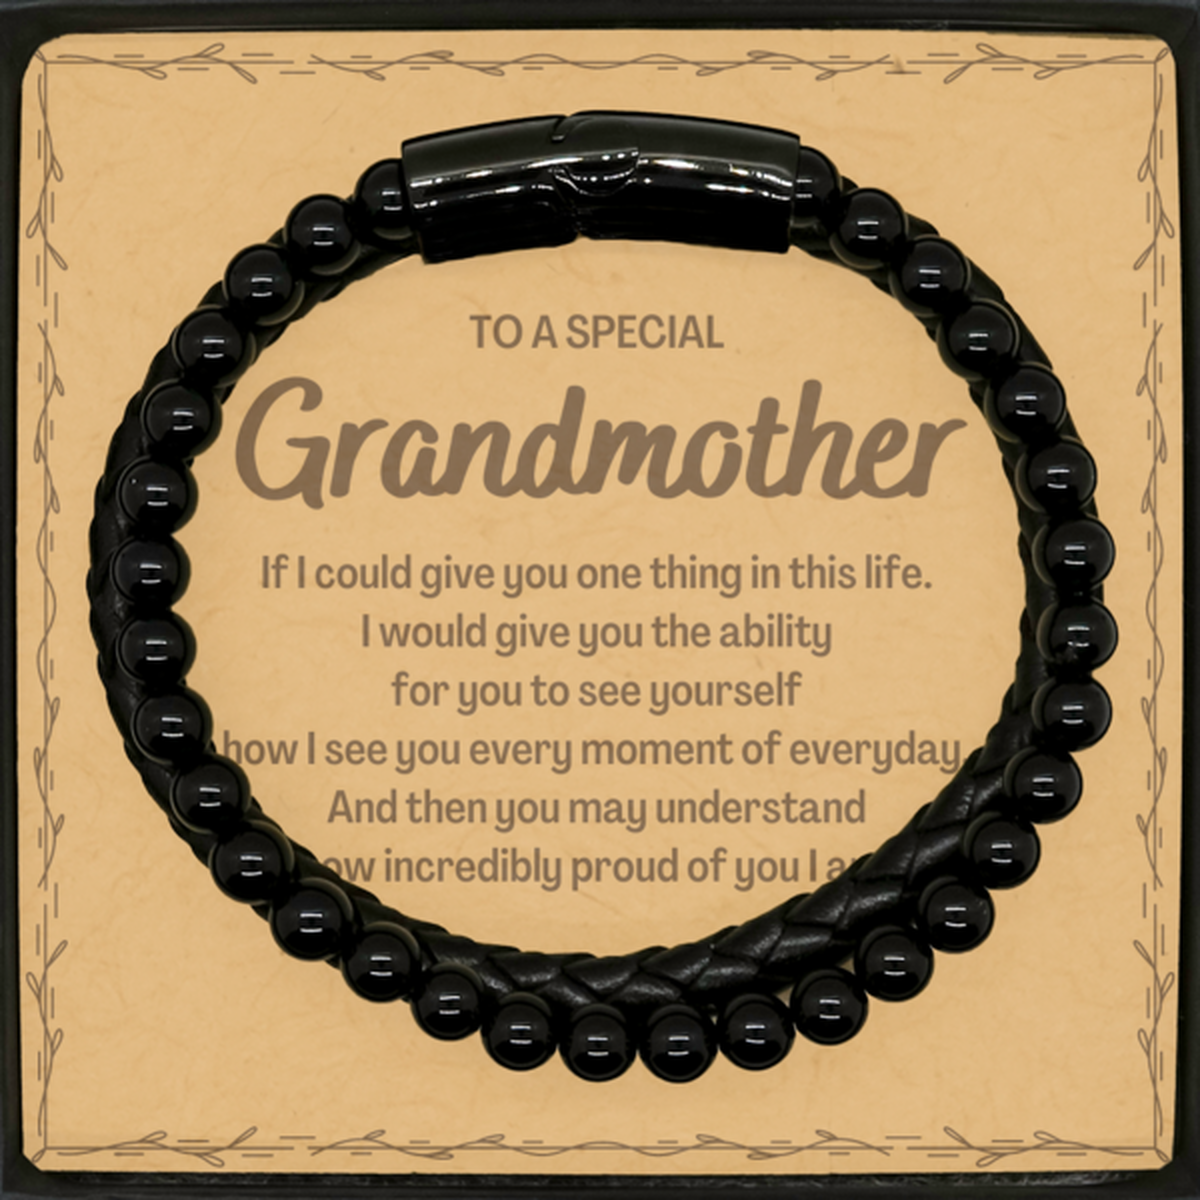 To My Grandmother Stone Leather Bracelets, Gifts For Grandmother Message Card, Inspirational Gifts for Christmas Birthday, Epic Gifts for Grandmother To A Special Grandmother how incredibly proud of you I am